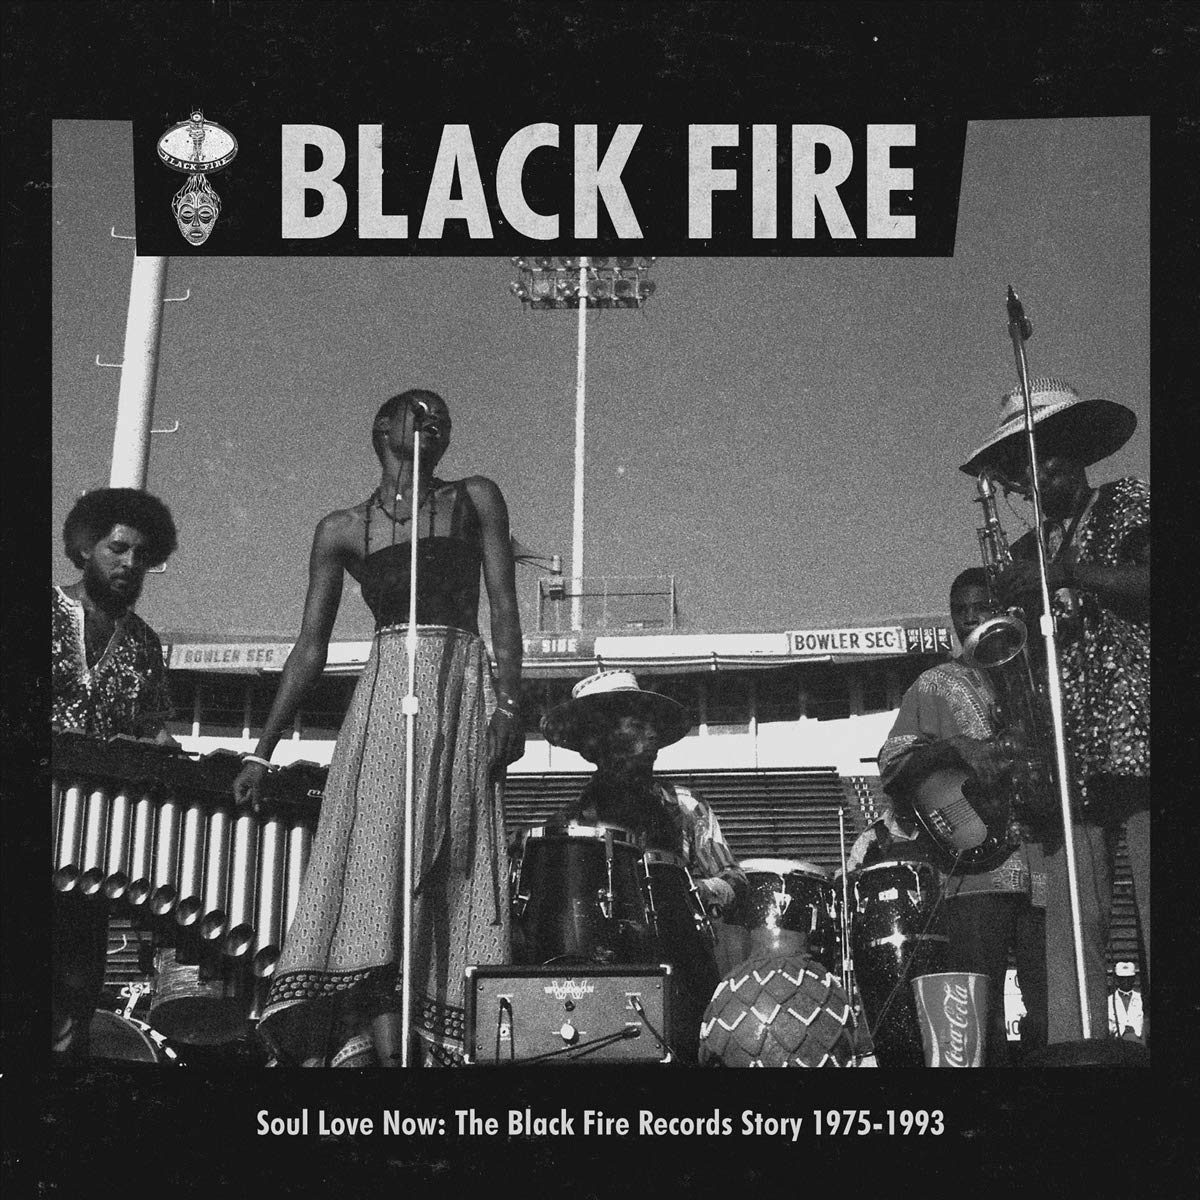 V/A - Soul Love Now – The Black Fire Records Story 1975-1993 - 2LP